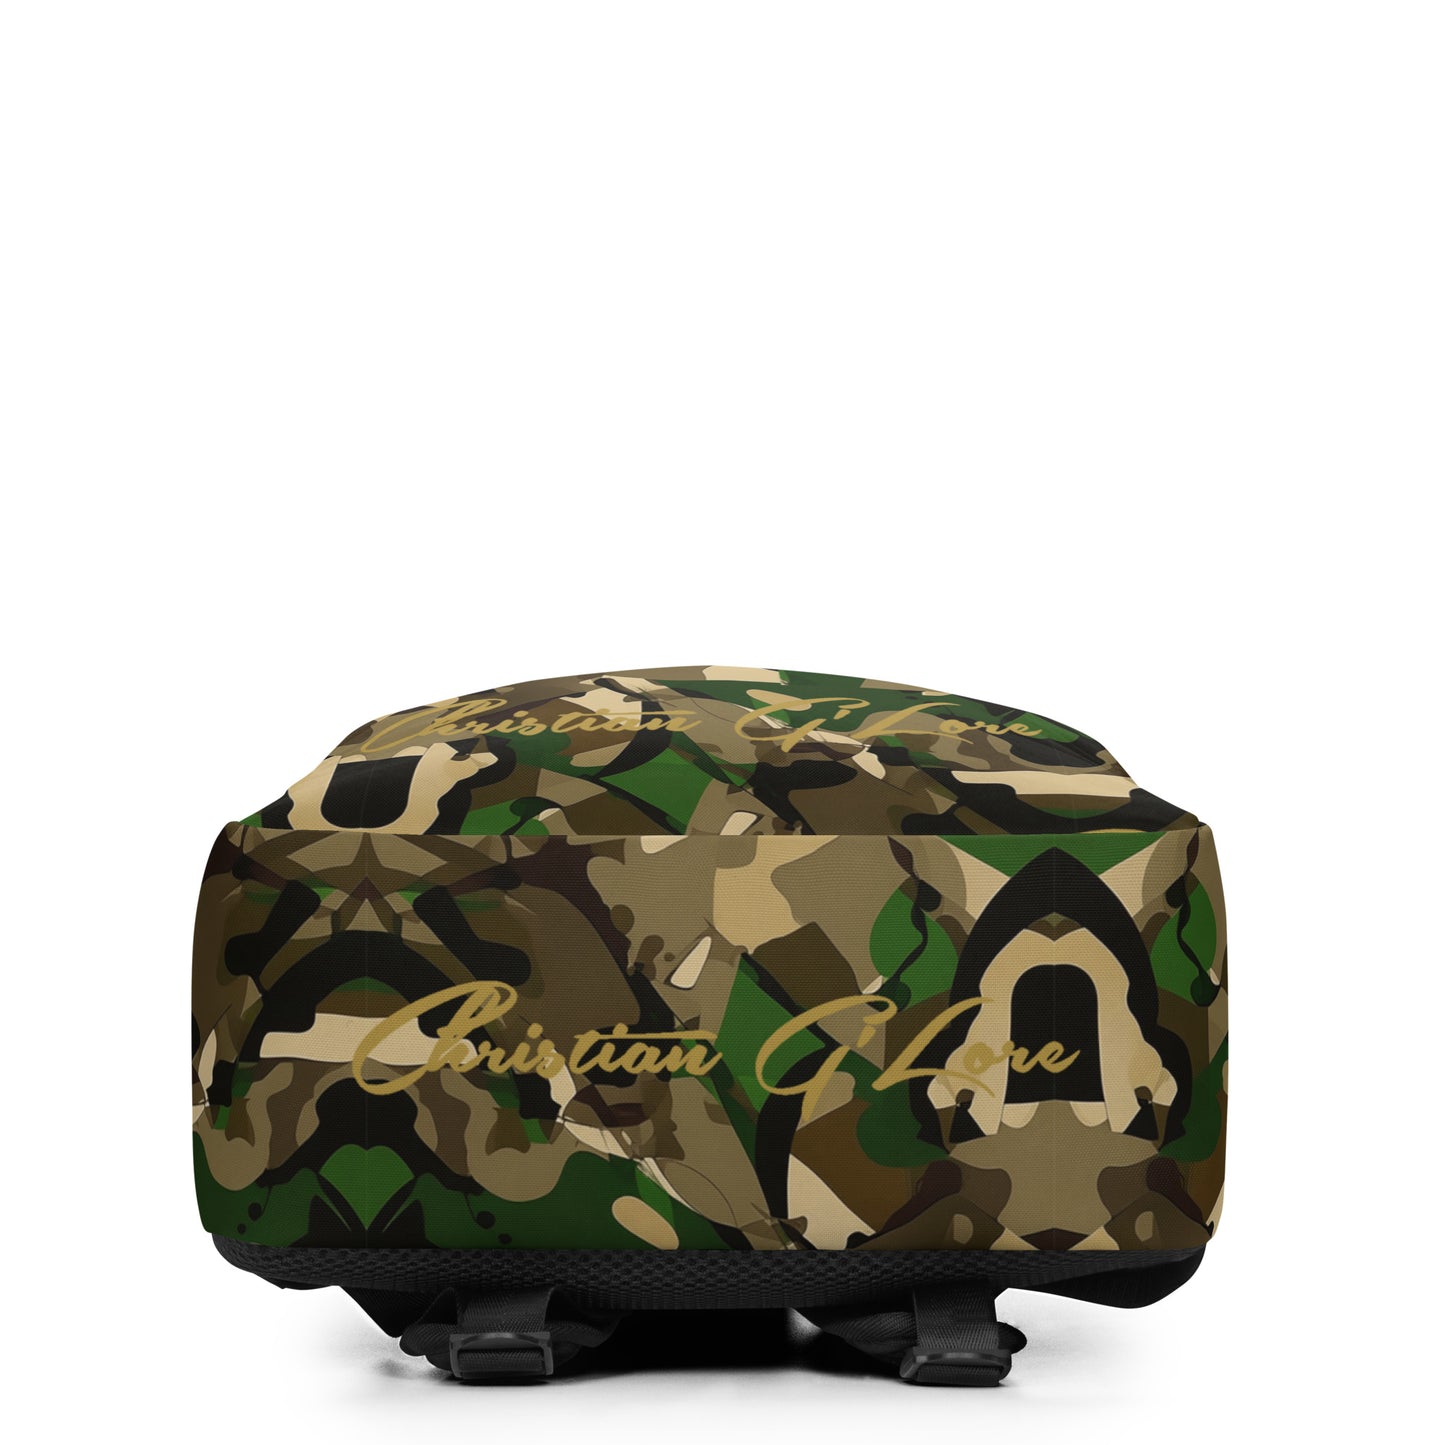 Camo Back Pack